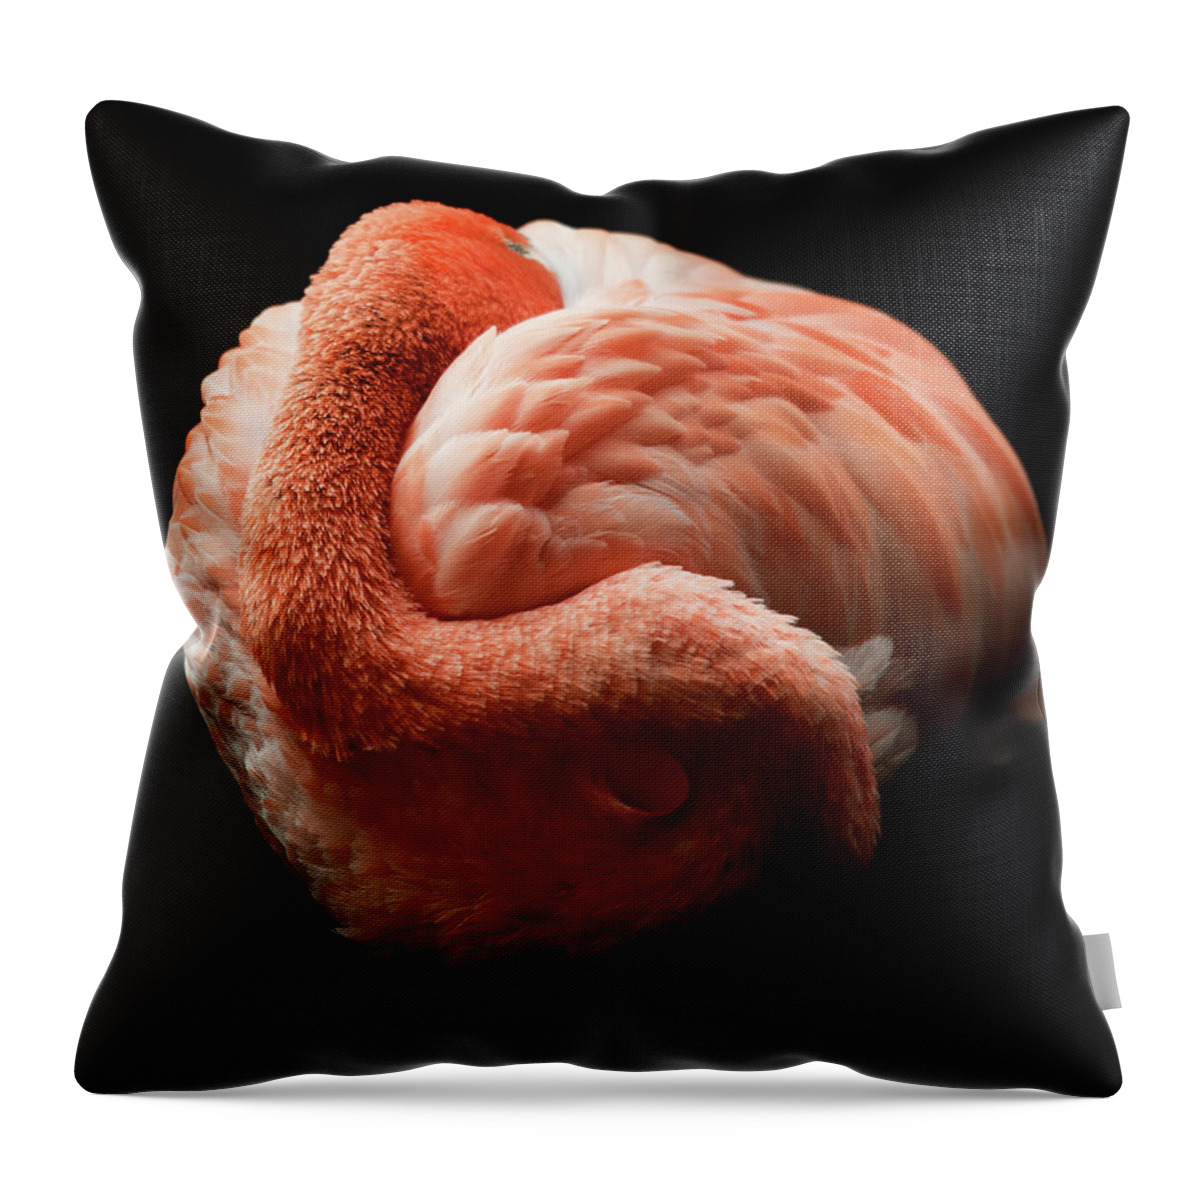 Black Background Throw Pillow featuring the photograph Flamingo by Tomml